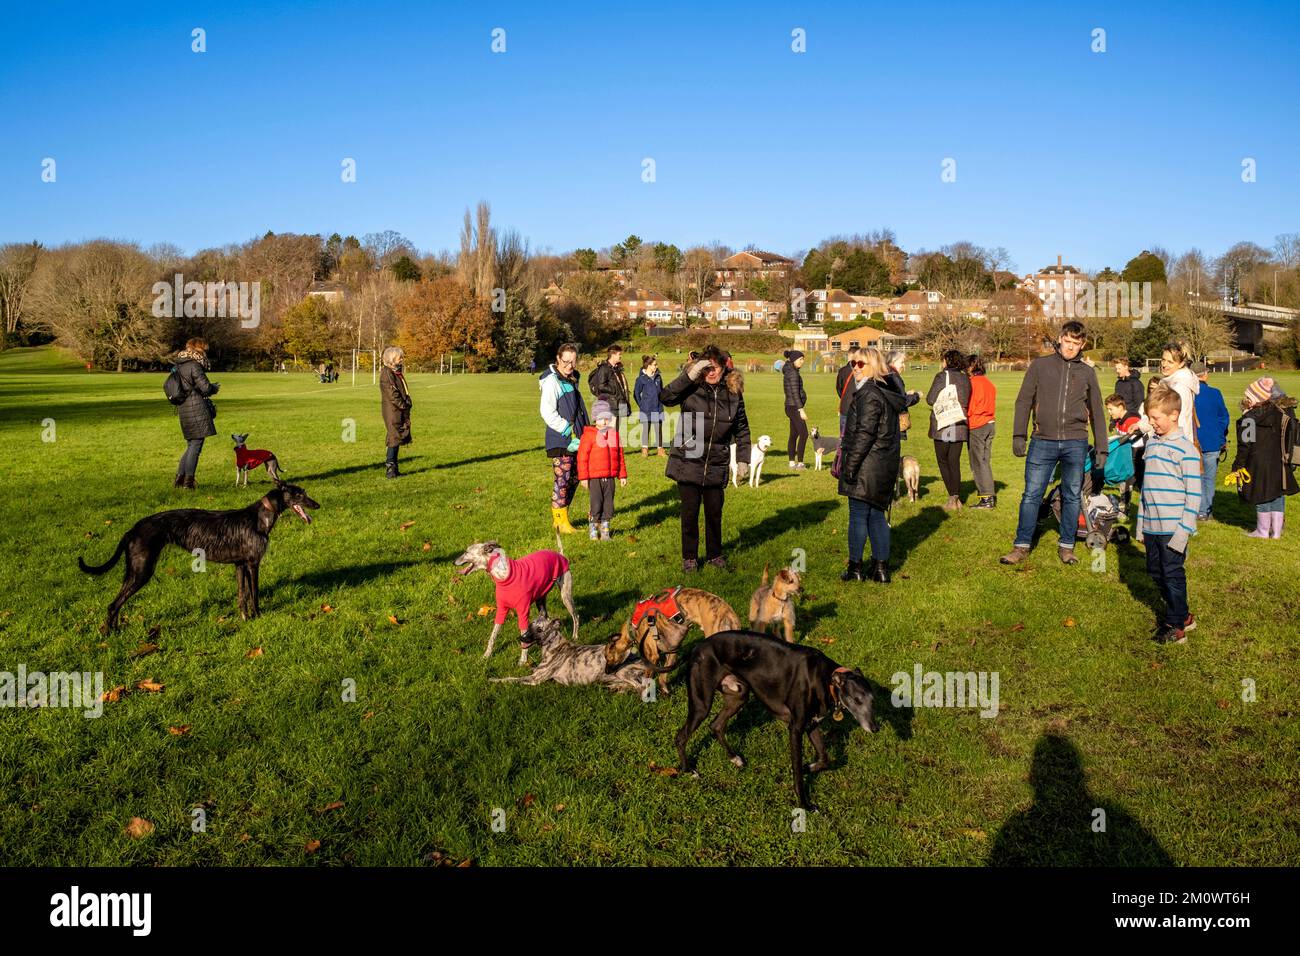 The Owners of Whippets and Greyhounds Meet Up On Malling Fields, Lewes, East Sussex, UK. Stock Photo